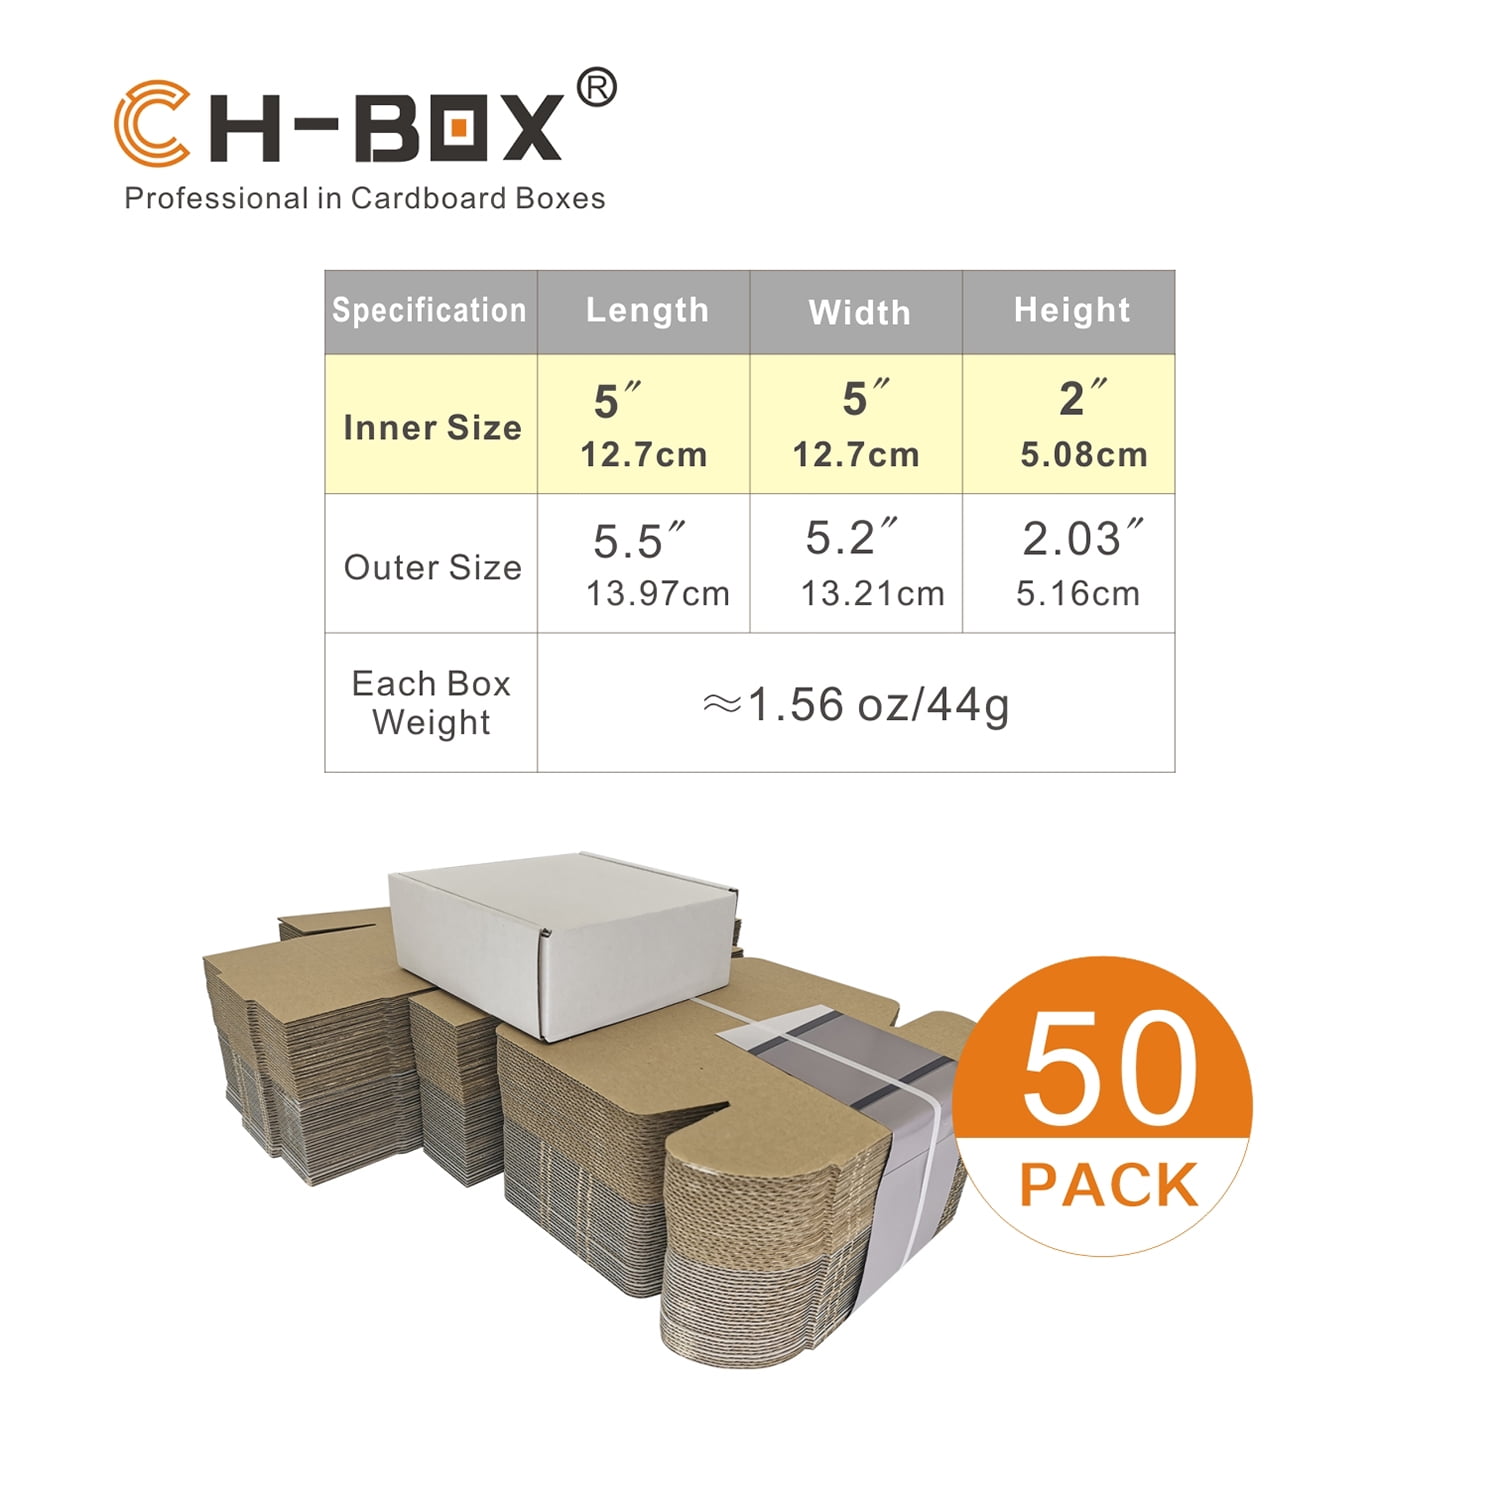 Pack of 50 Strong Corrugated Mailer 5x5x5 White Square Folding Mailing  Boxes